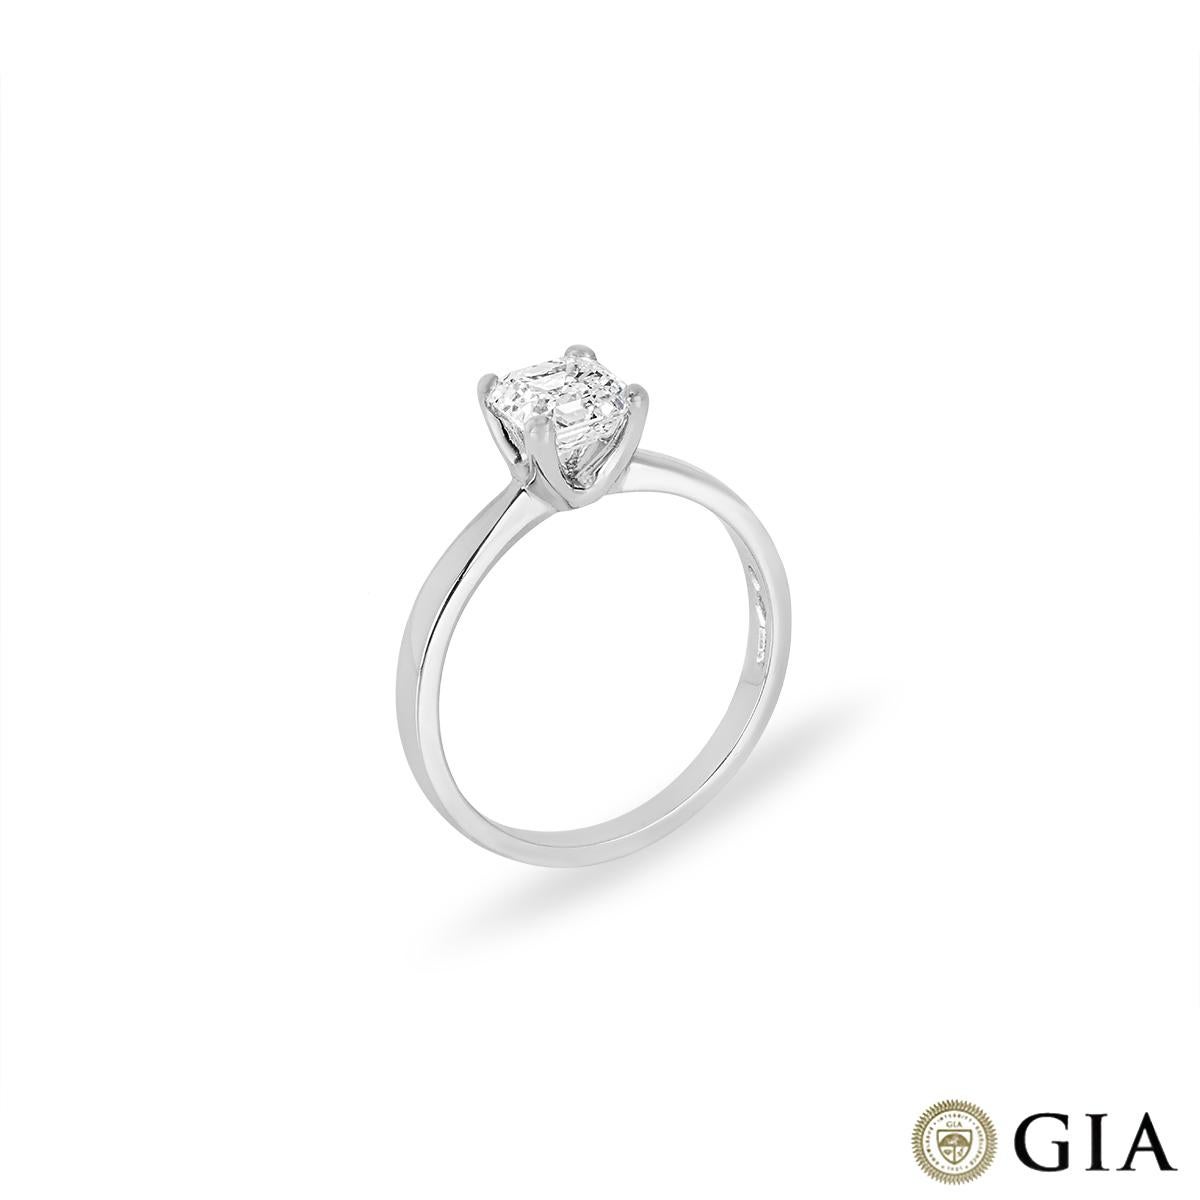 A captivating diamond solitaire ring. The ring is set with an asscher cut diamond weighing 0.97ct, F colour and VVS2 clarity. It measures 2mm in width, has a gross weight of 3.73 grams and is currently a UK size M½/ US size 6 1/4/ EU size 53 but can